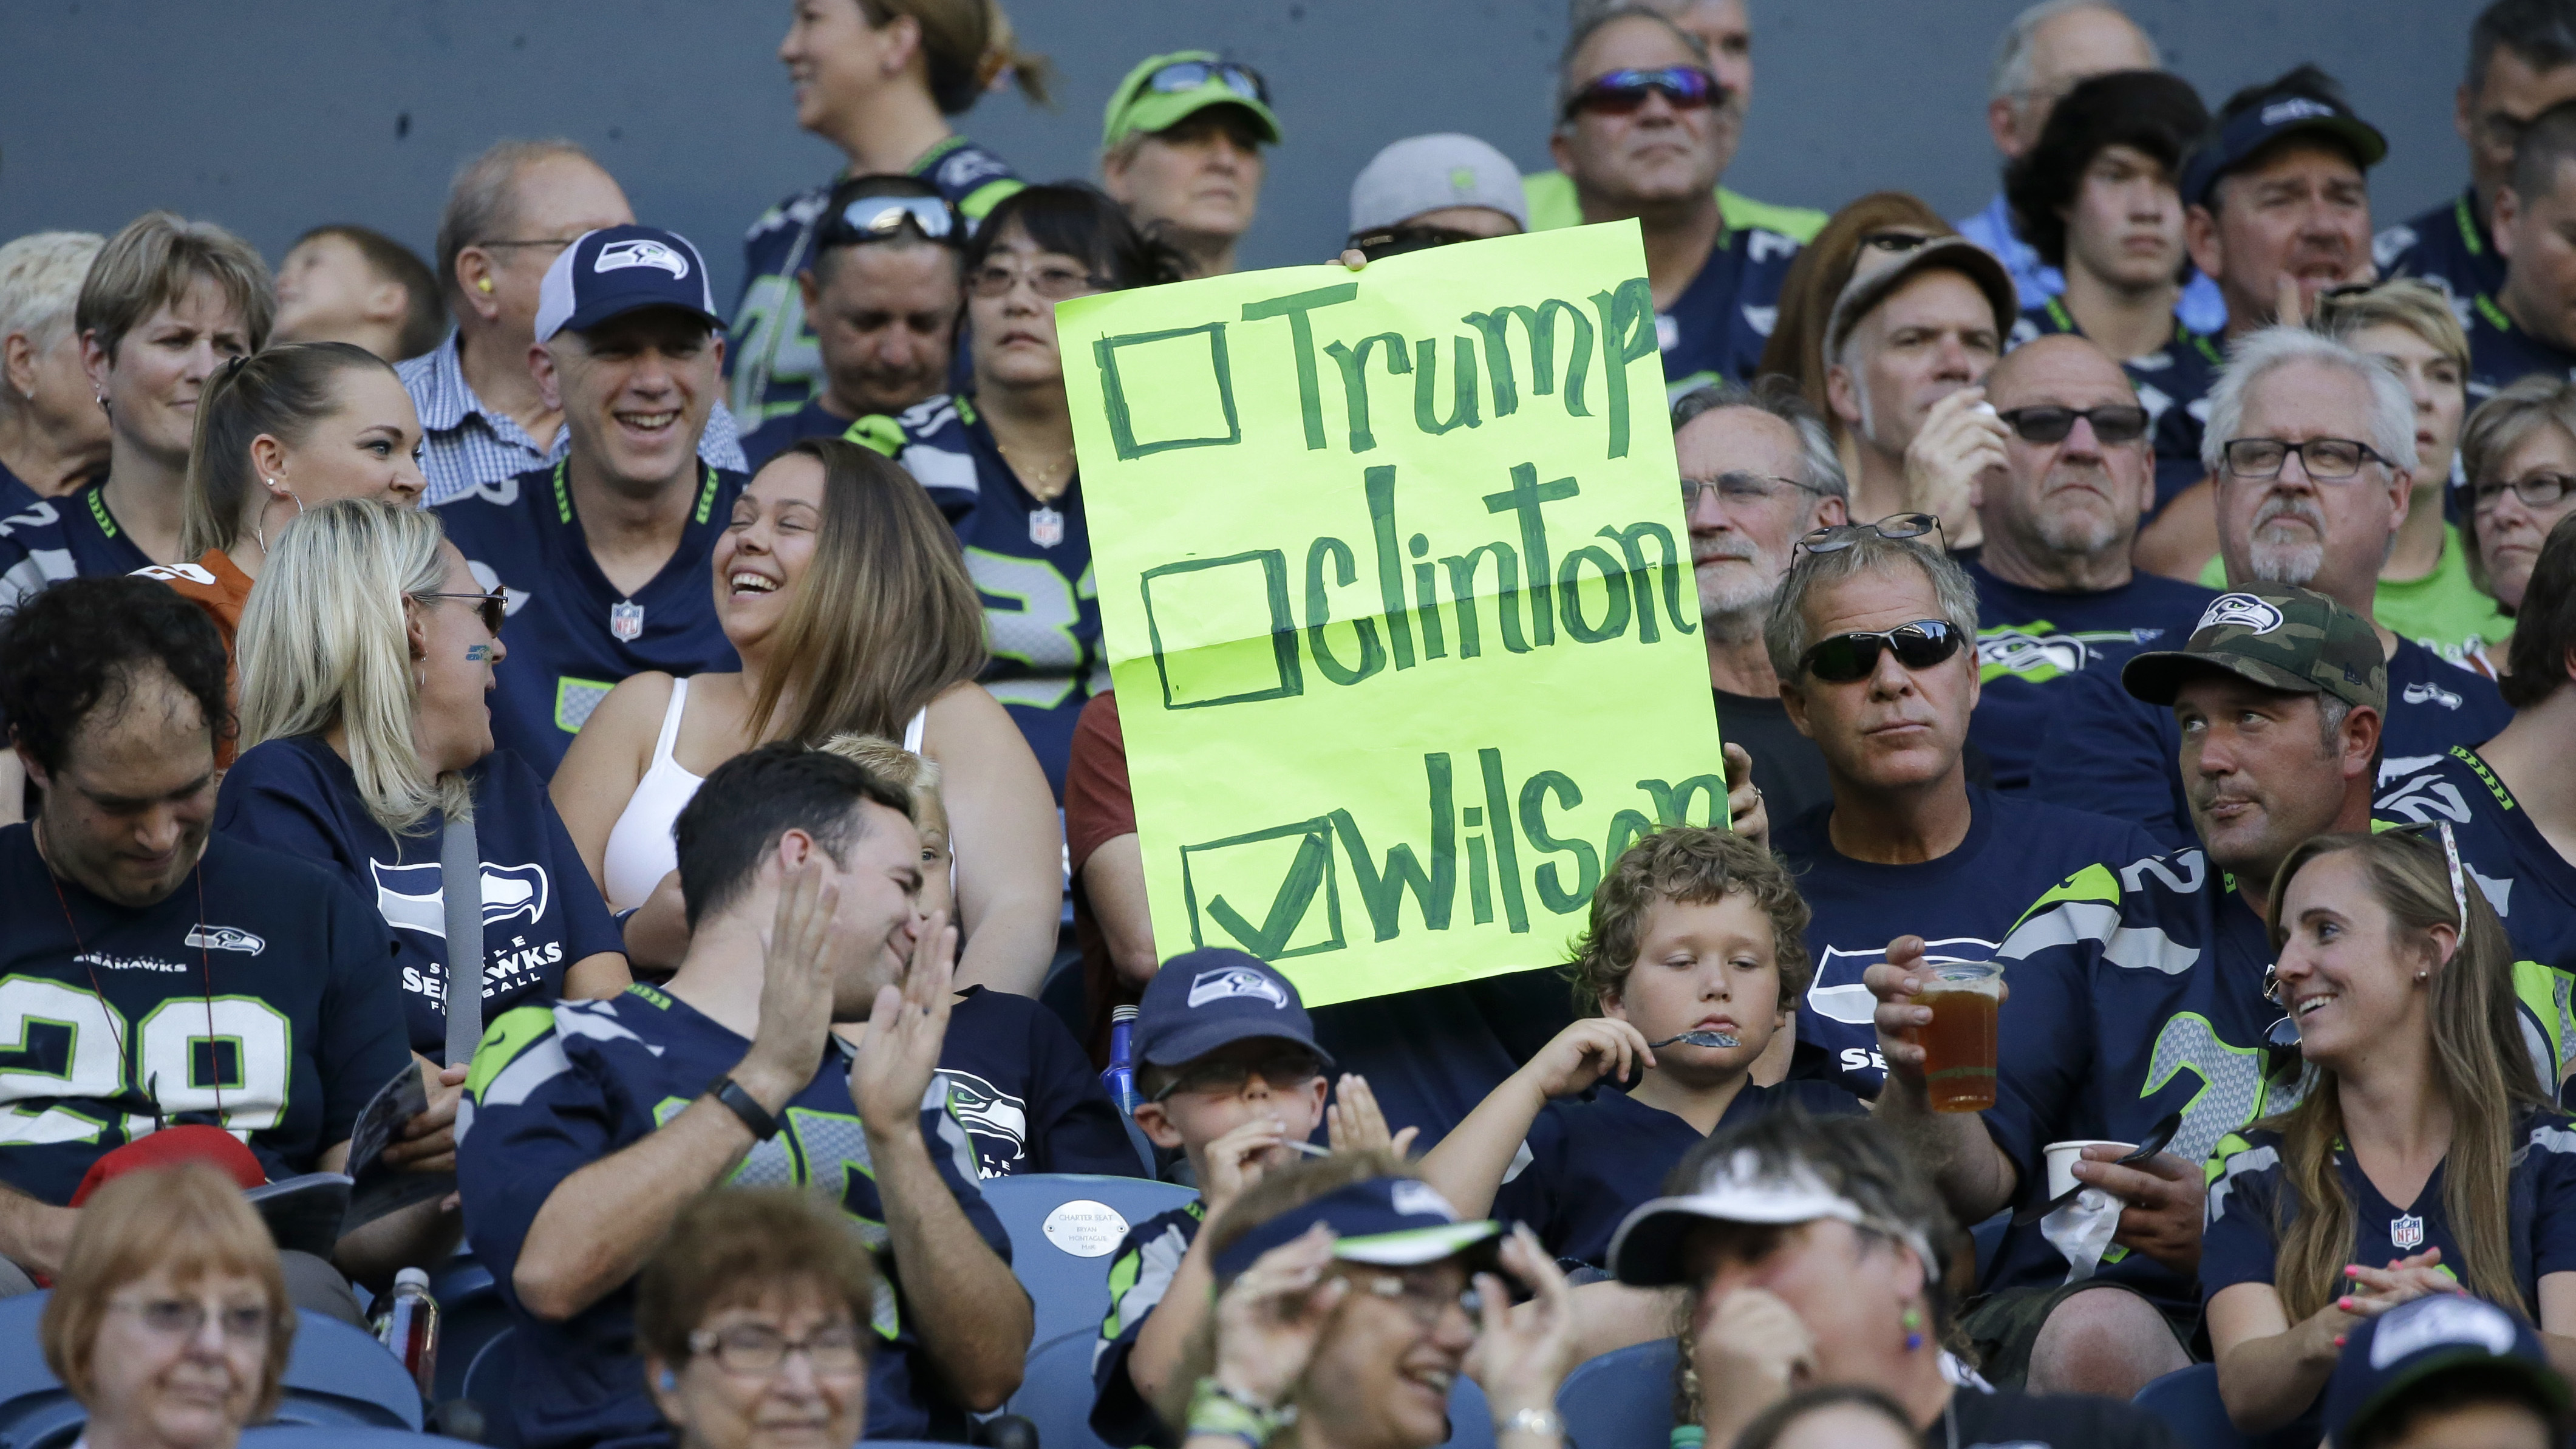 A Seattle Seahawks fan holds a sign suggesting quarterback Russell Wilson for president instead of Hillary Clinton or Donald Trump